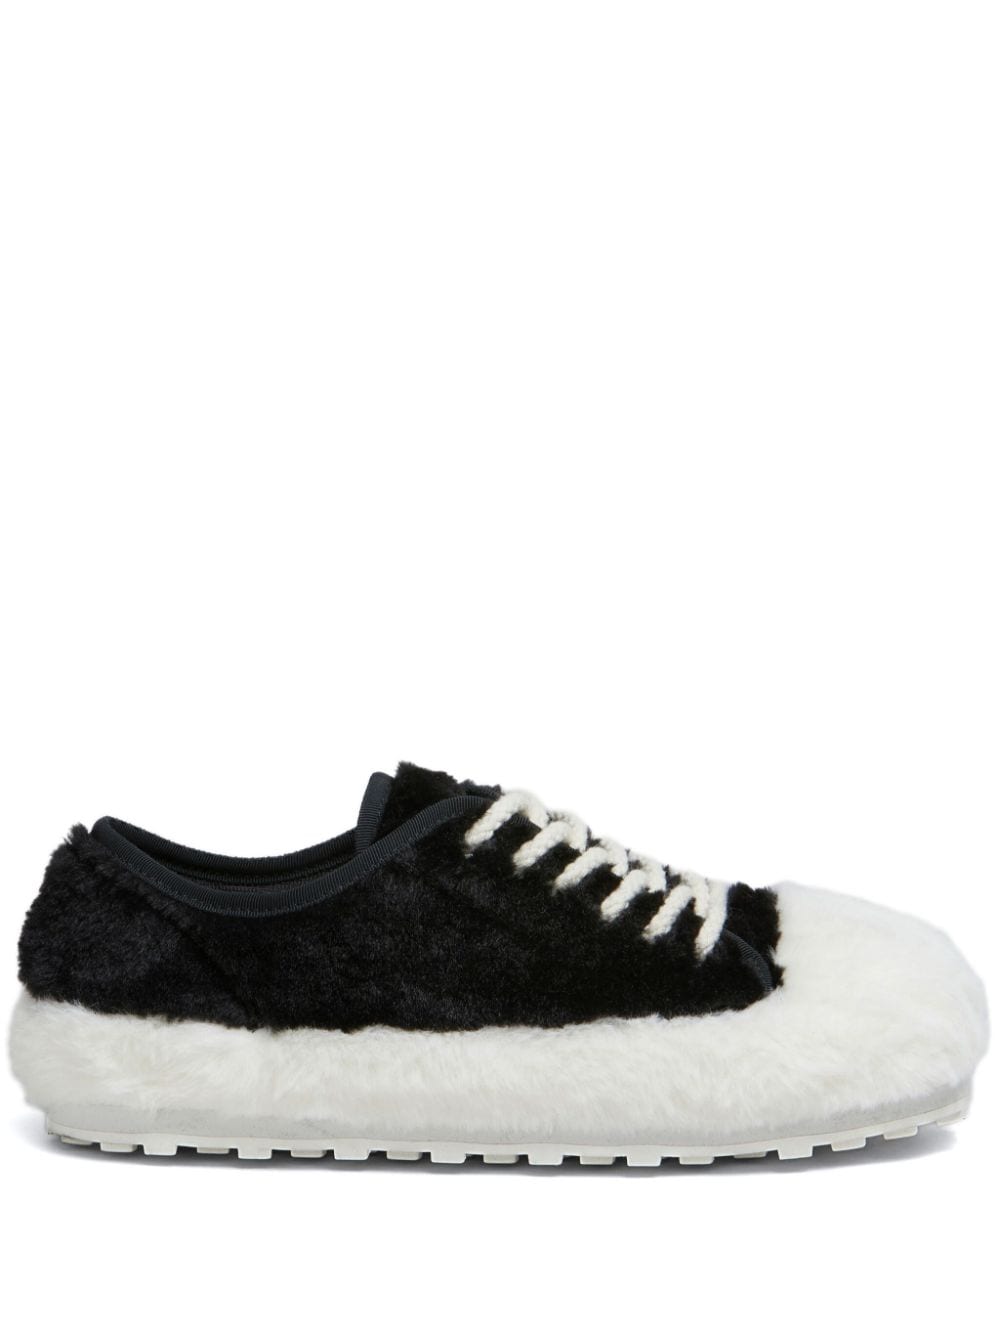 Marni Teddy Lace-up Sneakers In Black